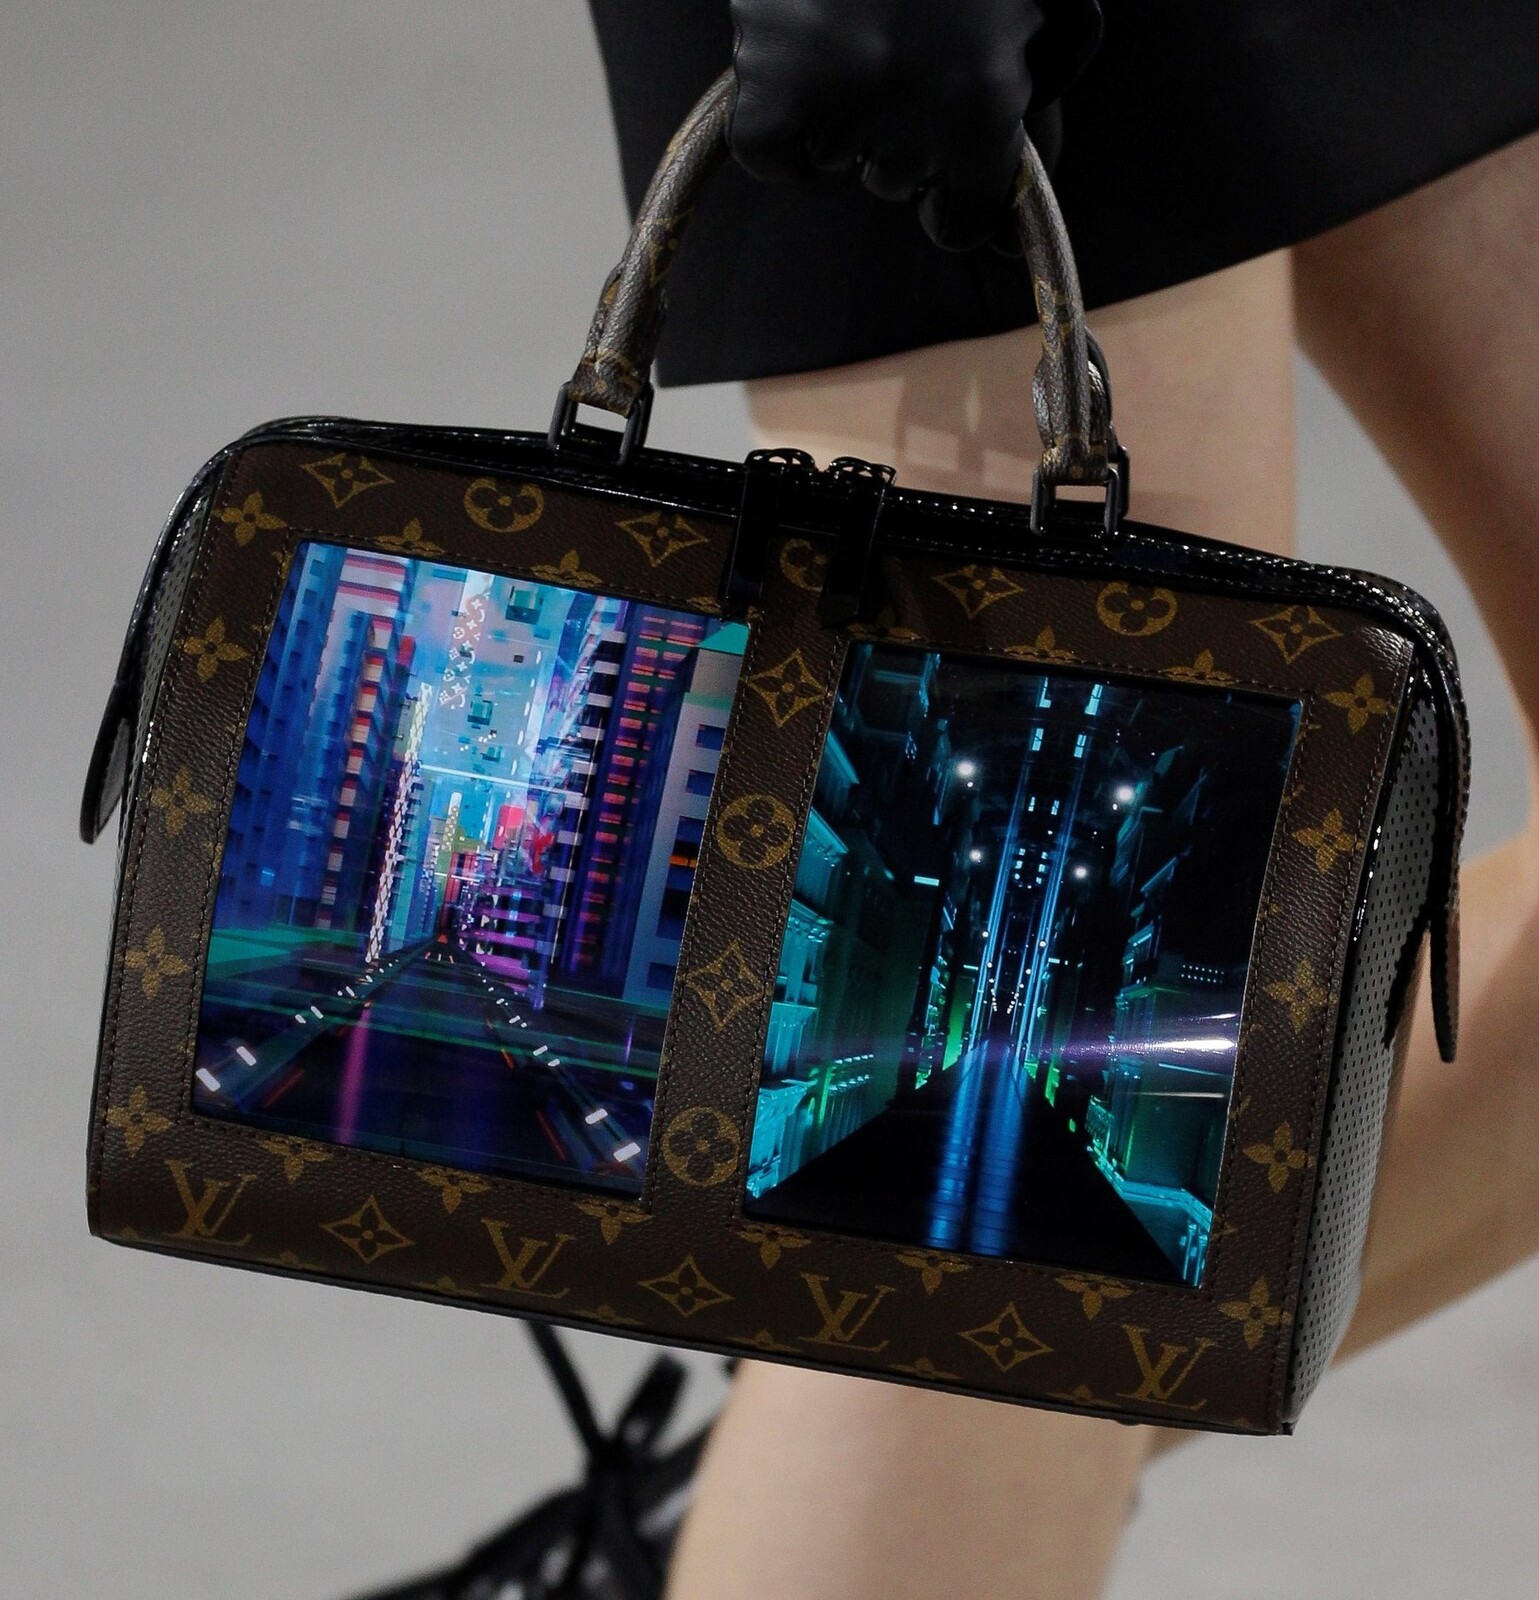 Louis Vuitton and Royole put two web browsers on a handbag - The Verge